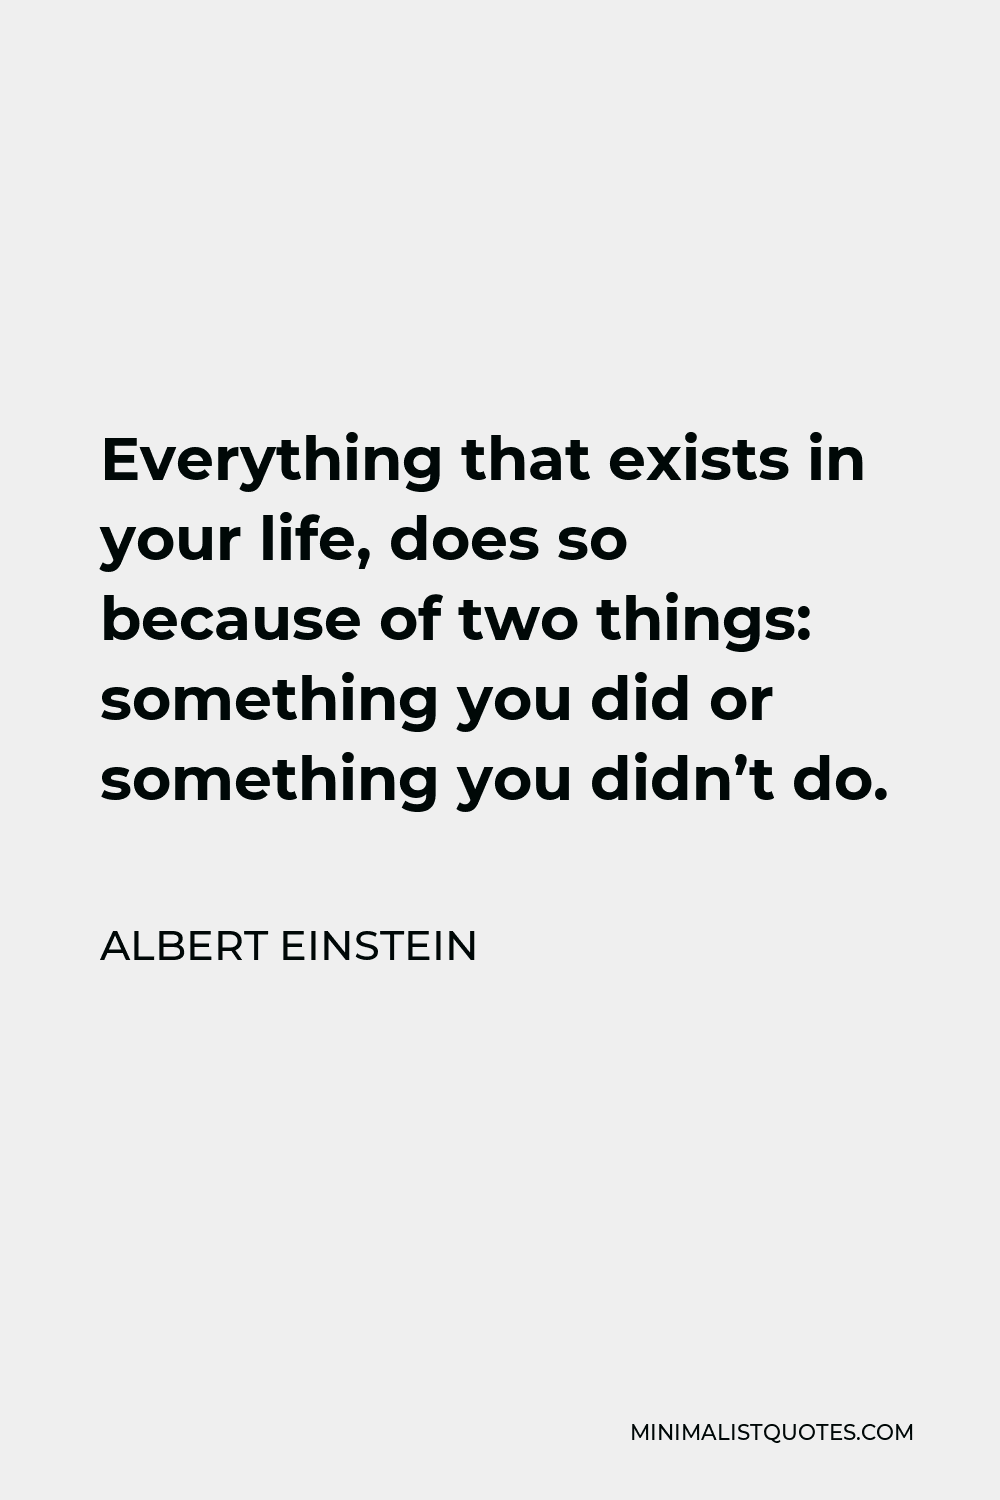 Albert Einstein Quote - Everything that exists in your life, does so because of two things: something you did or something you didn’t do.